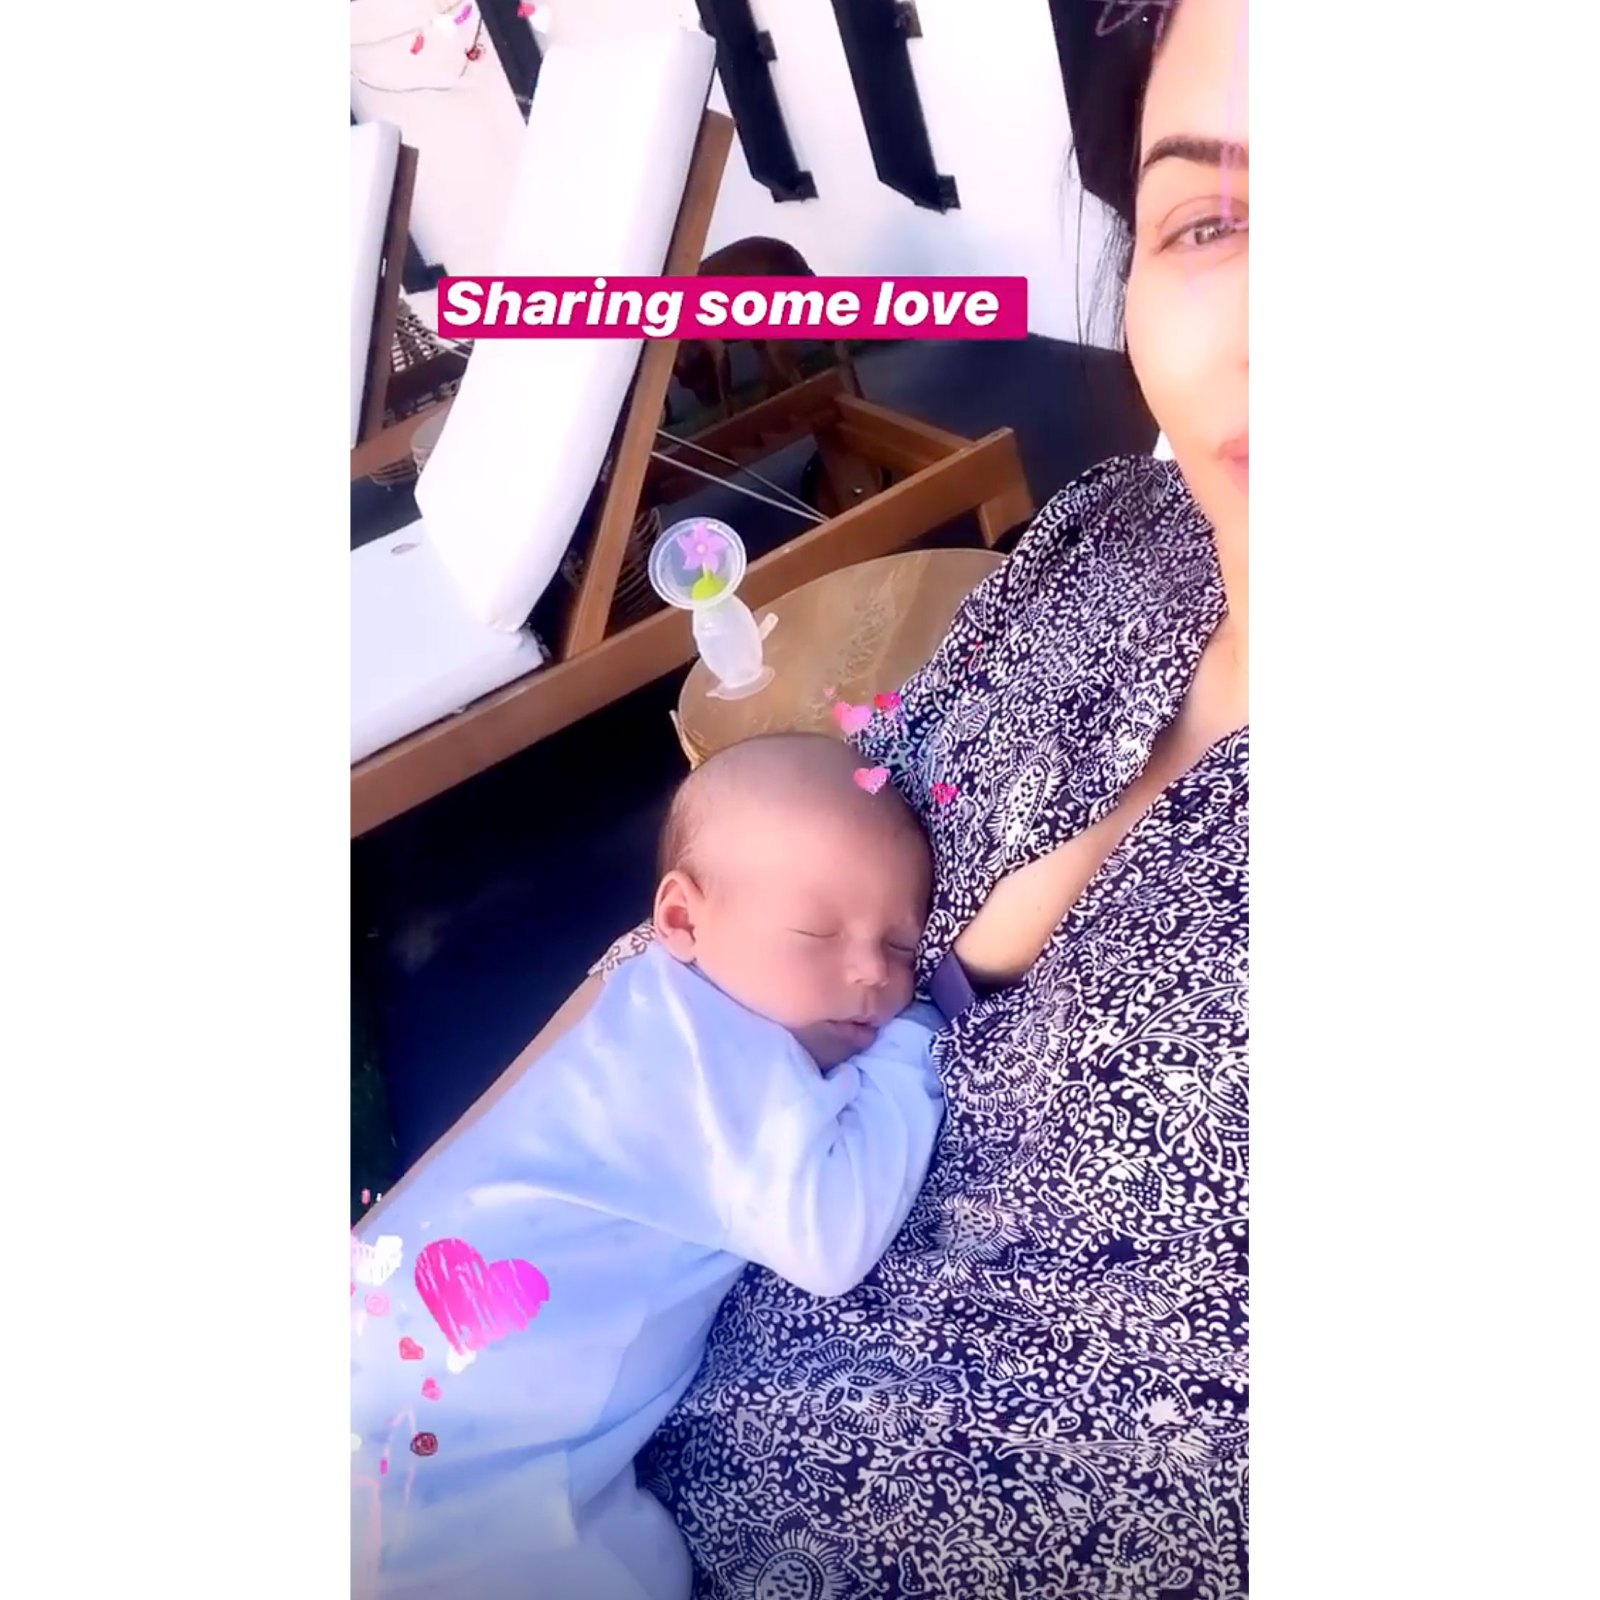 Jenna Dewans Sweetest Moments with Baby Callum Sharing Some Love